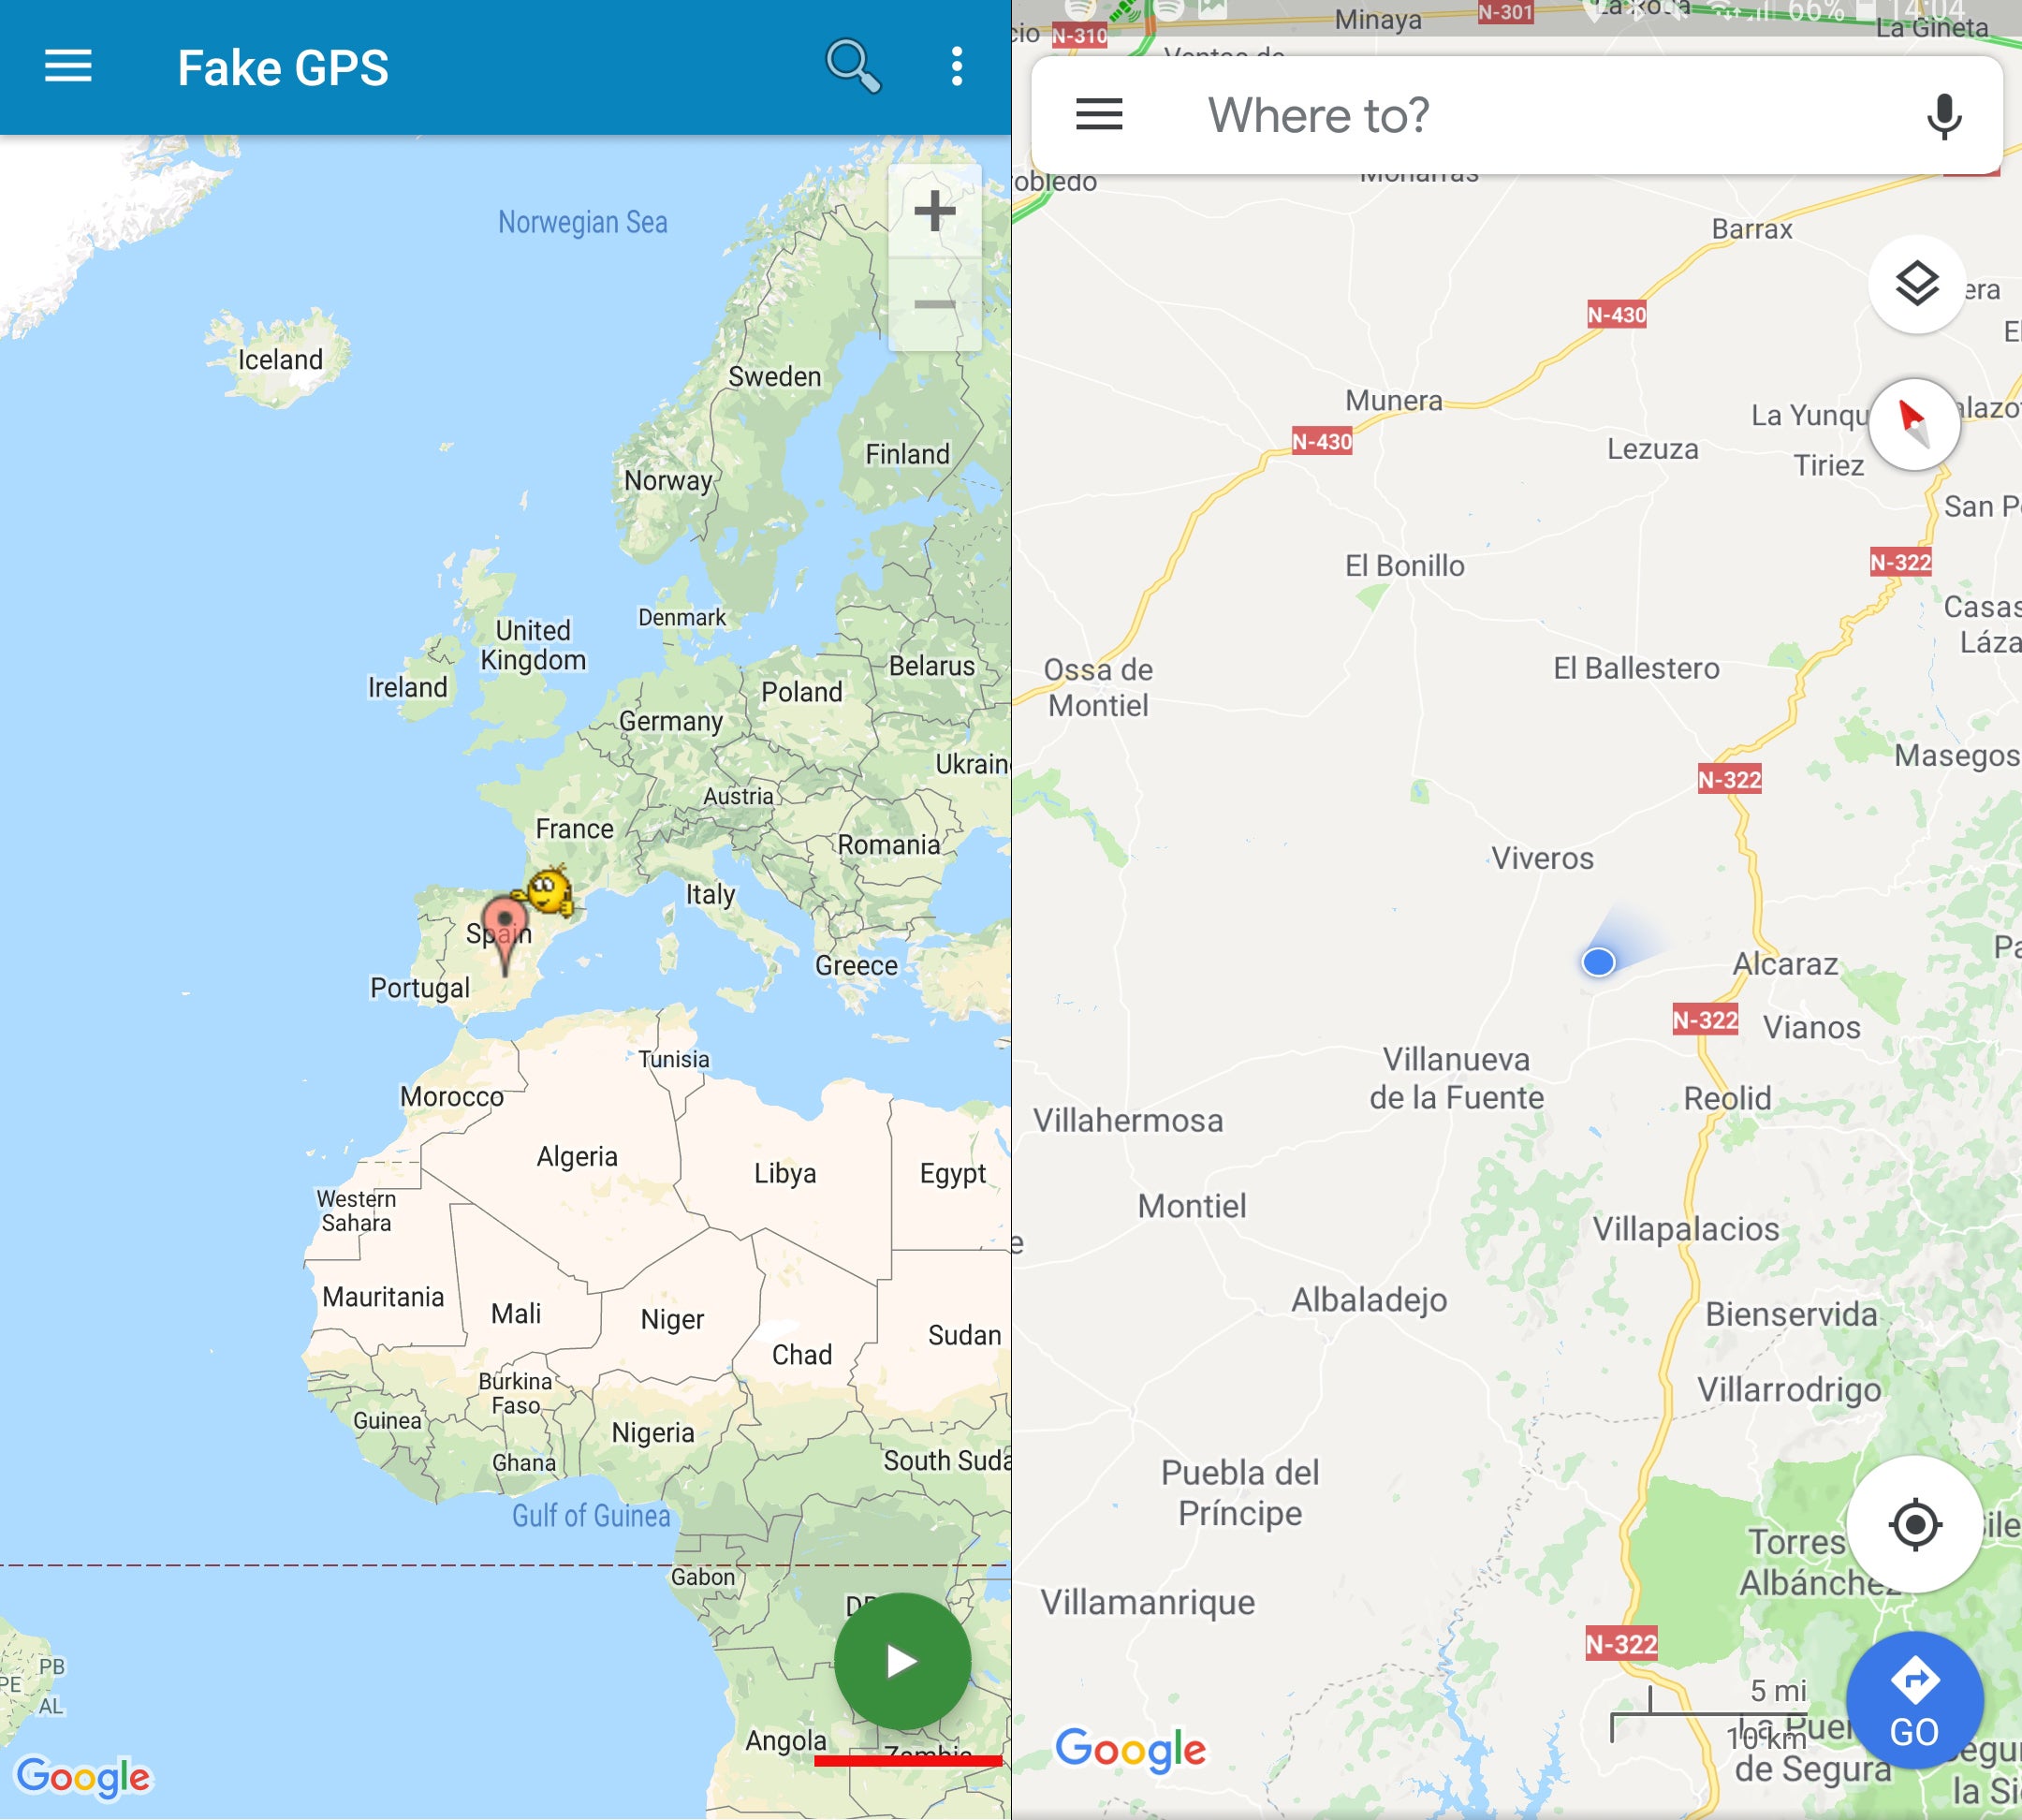 How to spoof your GPS location on Android in 2020